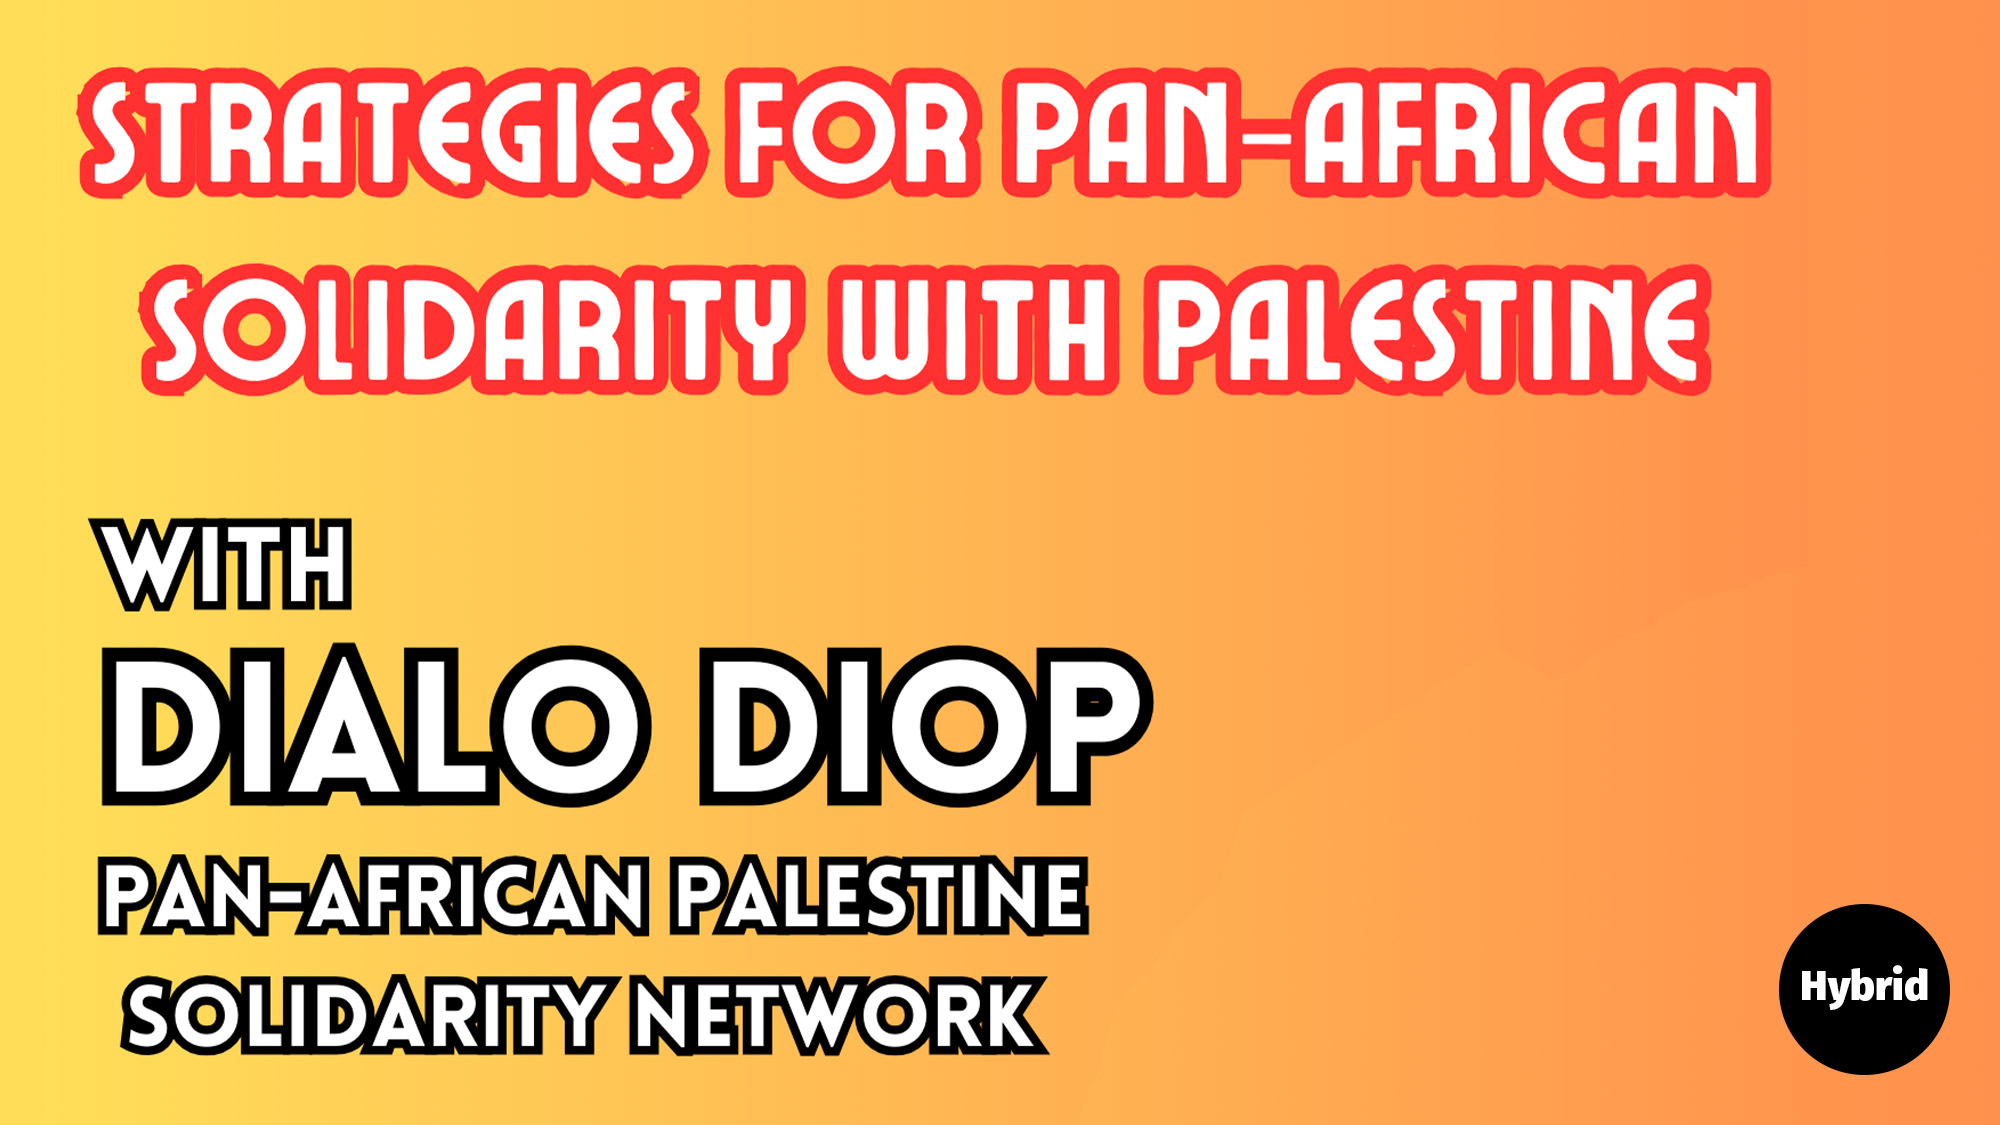 Text over a yellow to orange gradient background. "Strategies for Pan-African Solidarity with Palestine"